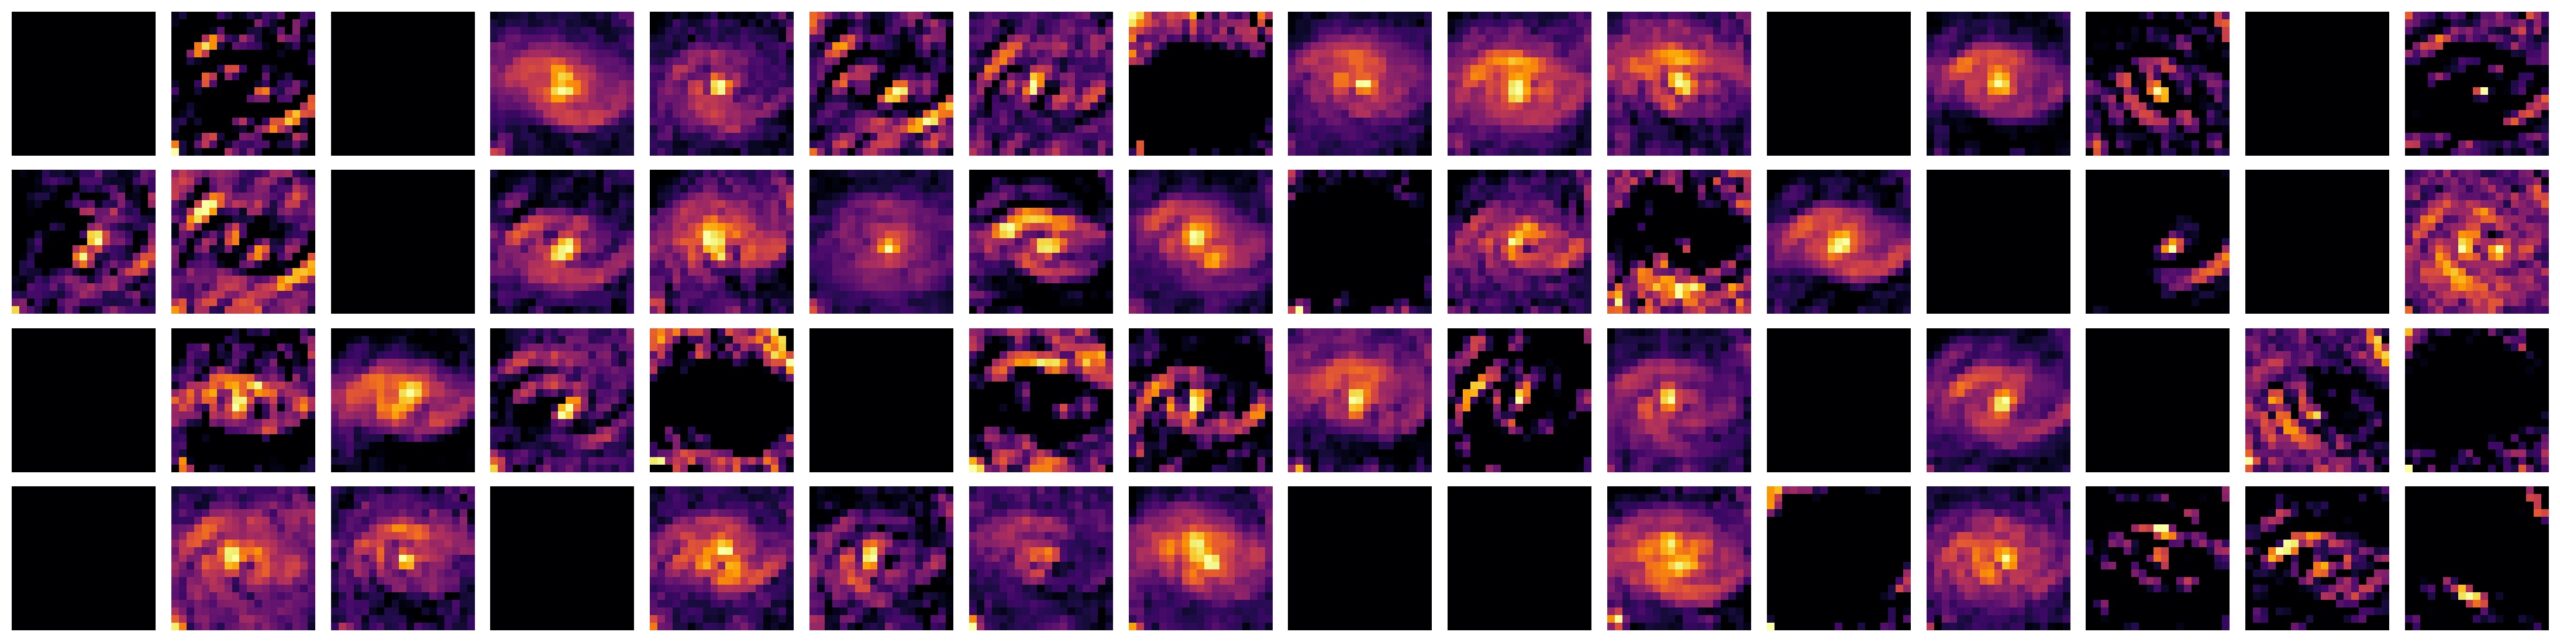 A composite image shows how different kinds of galaxies light up different parts ('layers') of the neural net